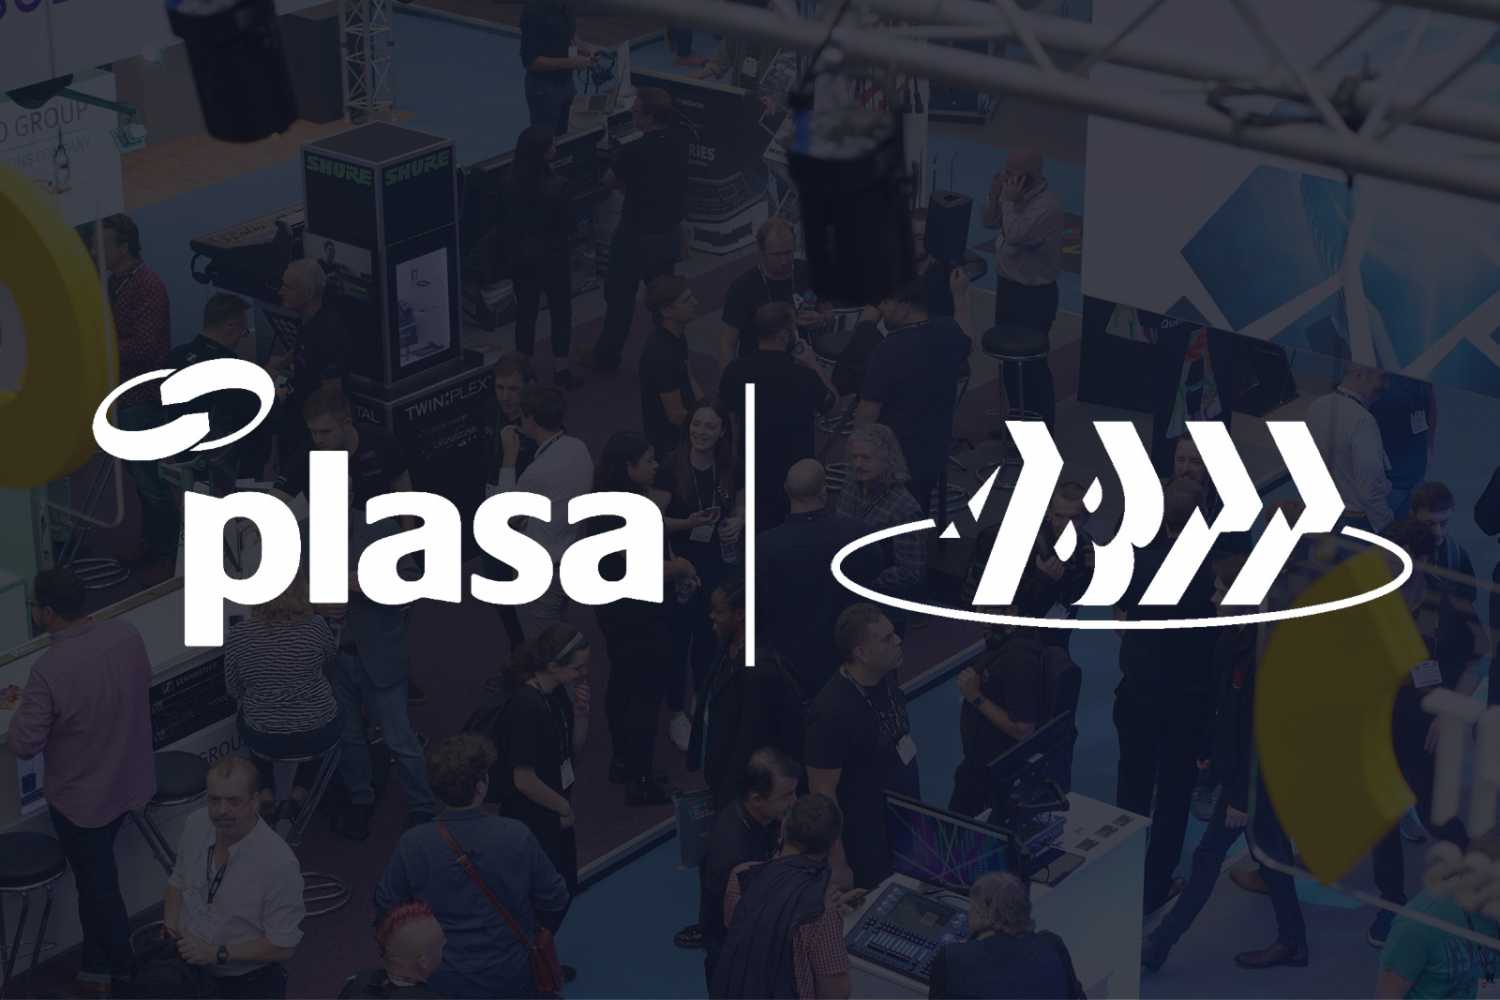 The 2021 editions of PLASA Show and the ABTT Theatre Show will take place under one roof from 5-7 September at London Olympia